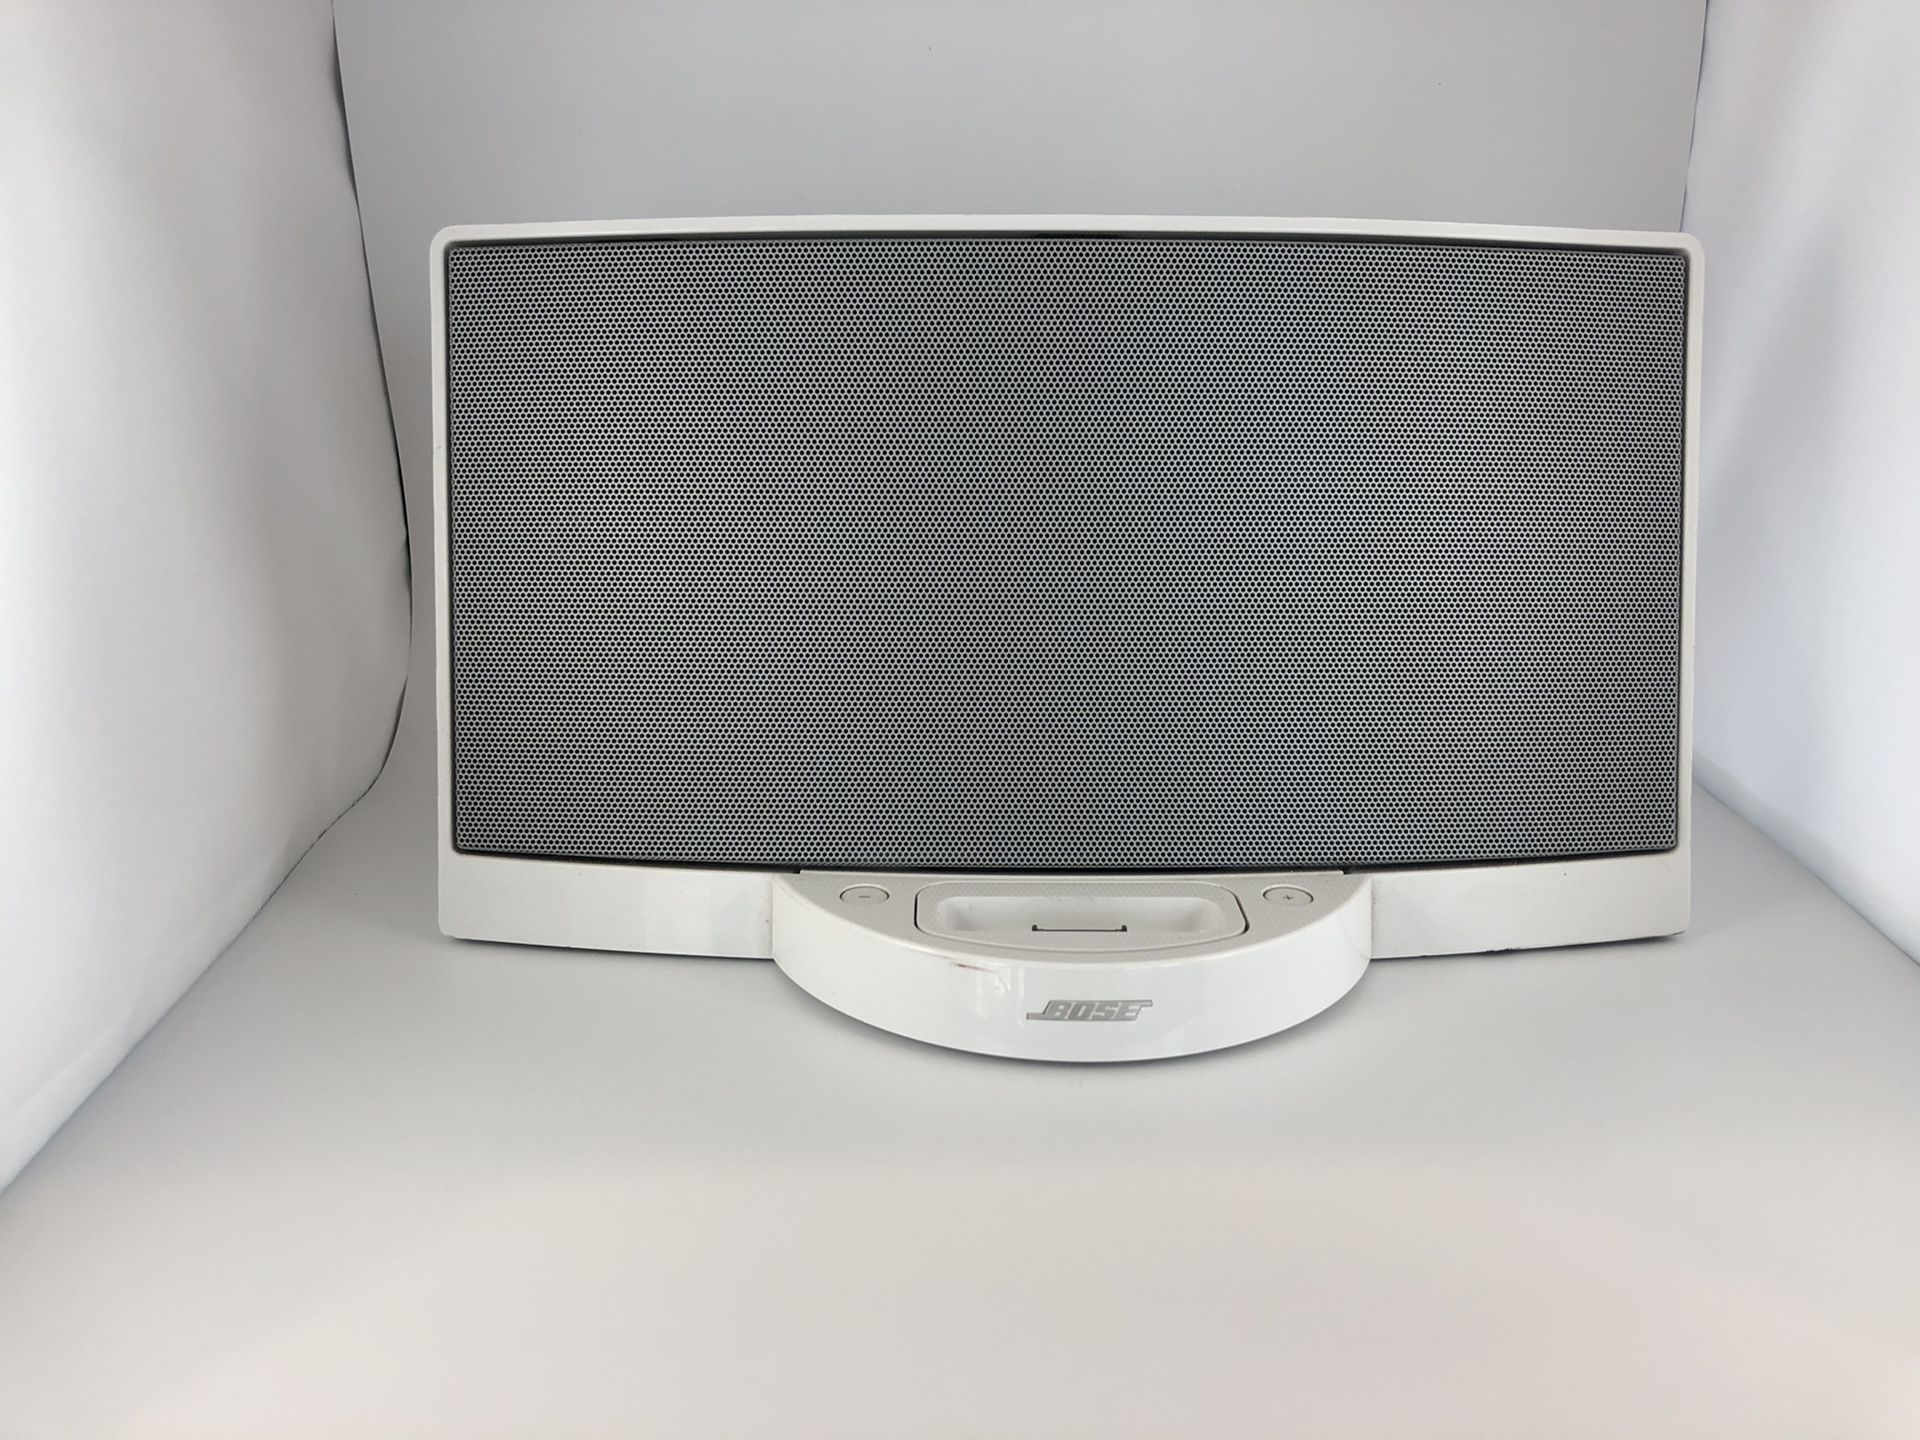 BOSE white SoundDock Digital Music System - Series 1 for iPod